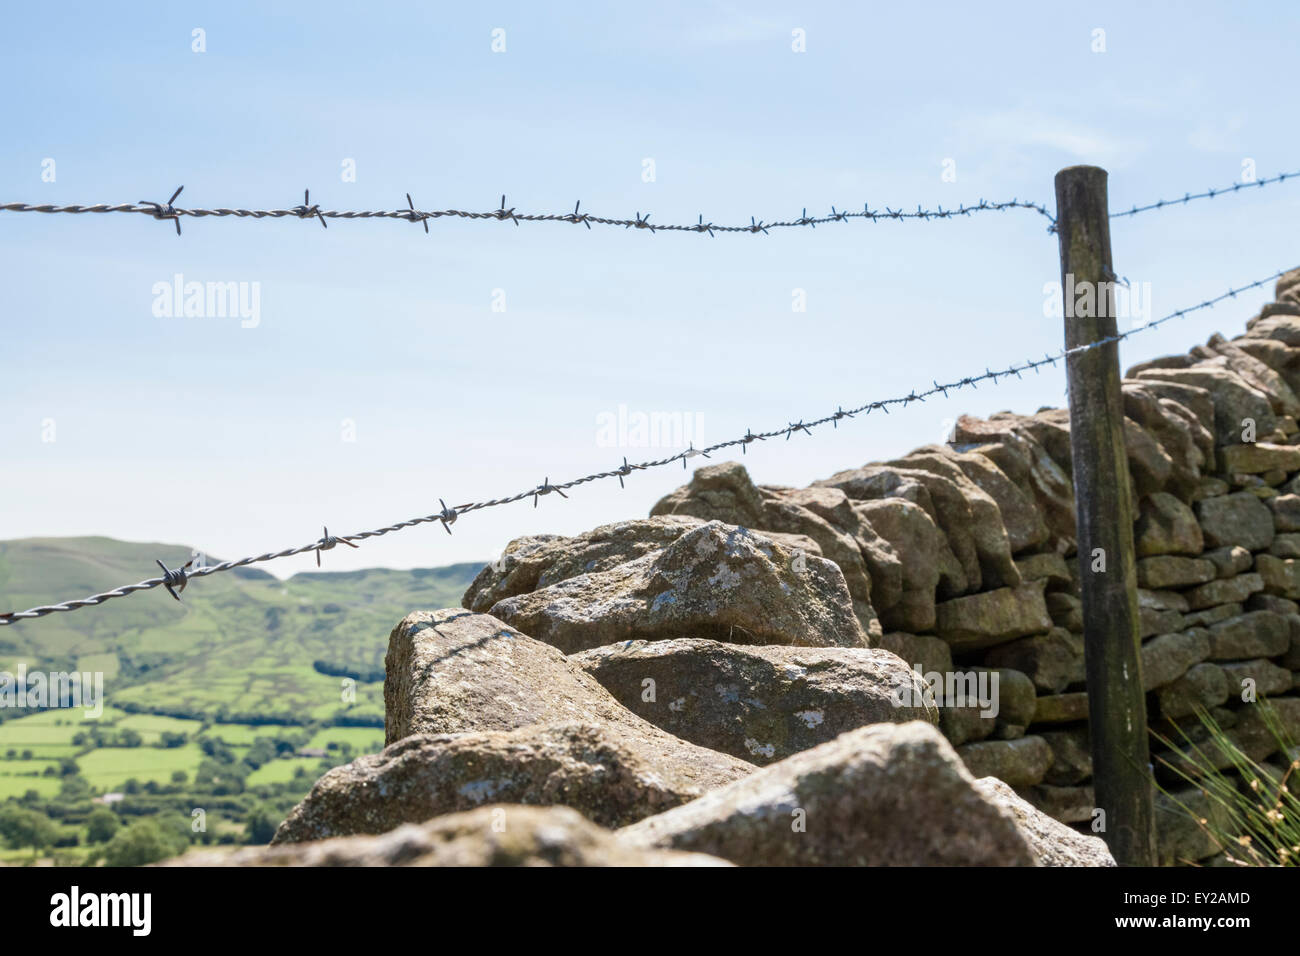 Dry stone wall (or drystone wall) with barbed wire along the top, Derbyshire, Peak District National Park, England, UK Stock Photo